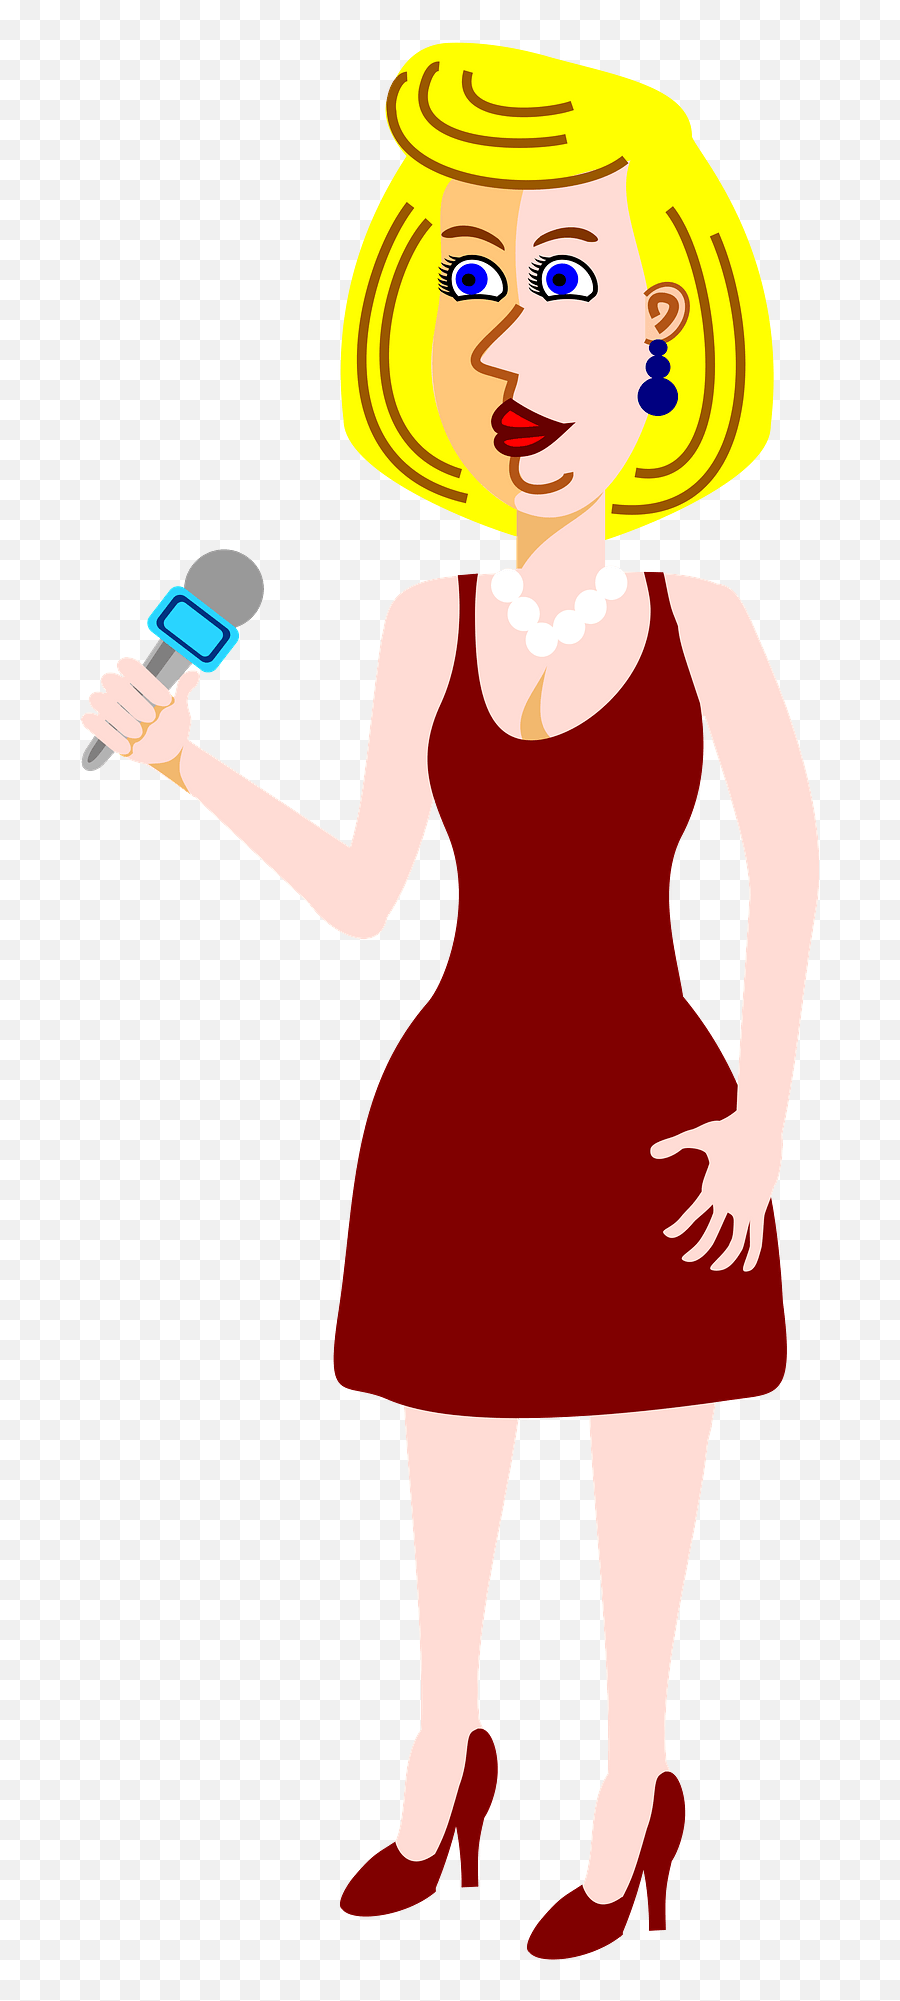 Woman Speaking Into A Microphone Clipart Free Download - Basic Dress Emoji,Microphone Transparent